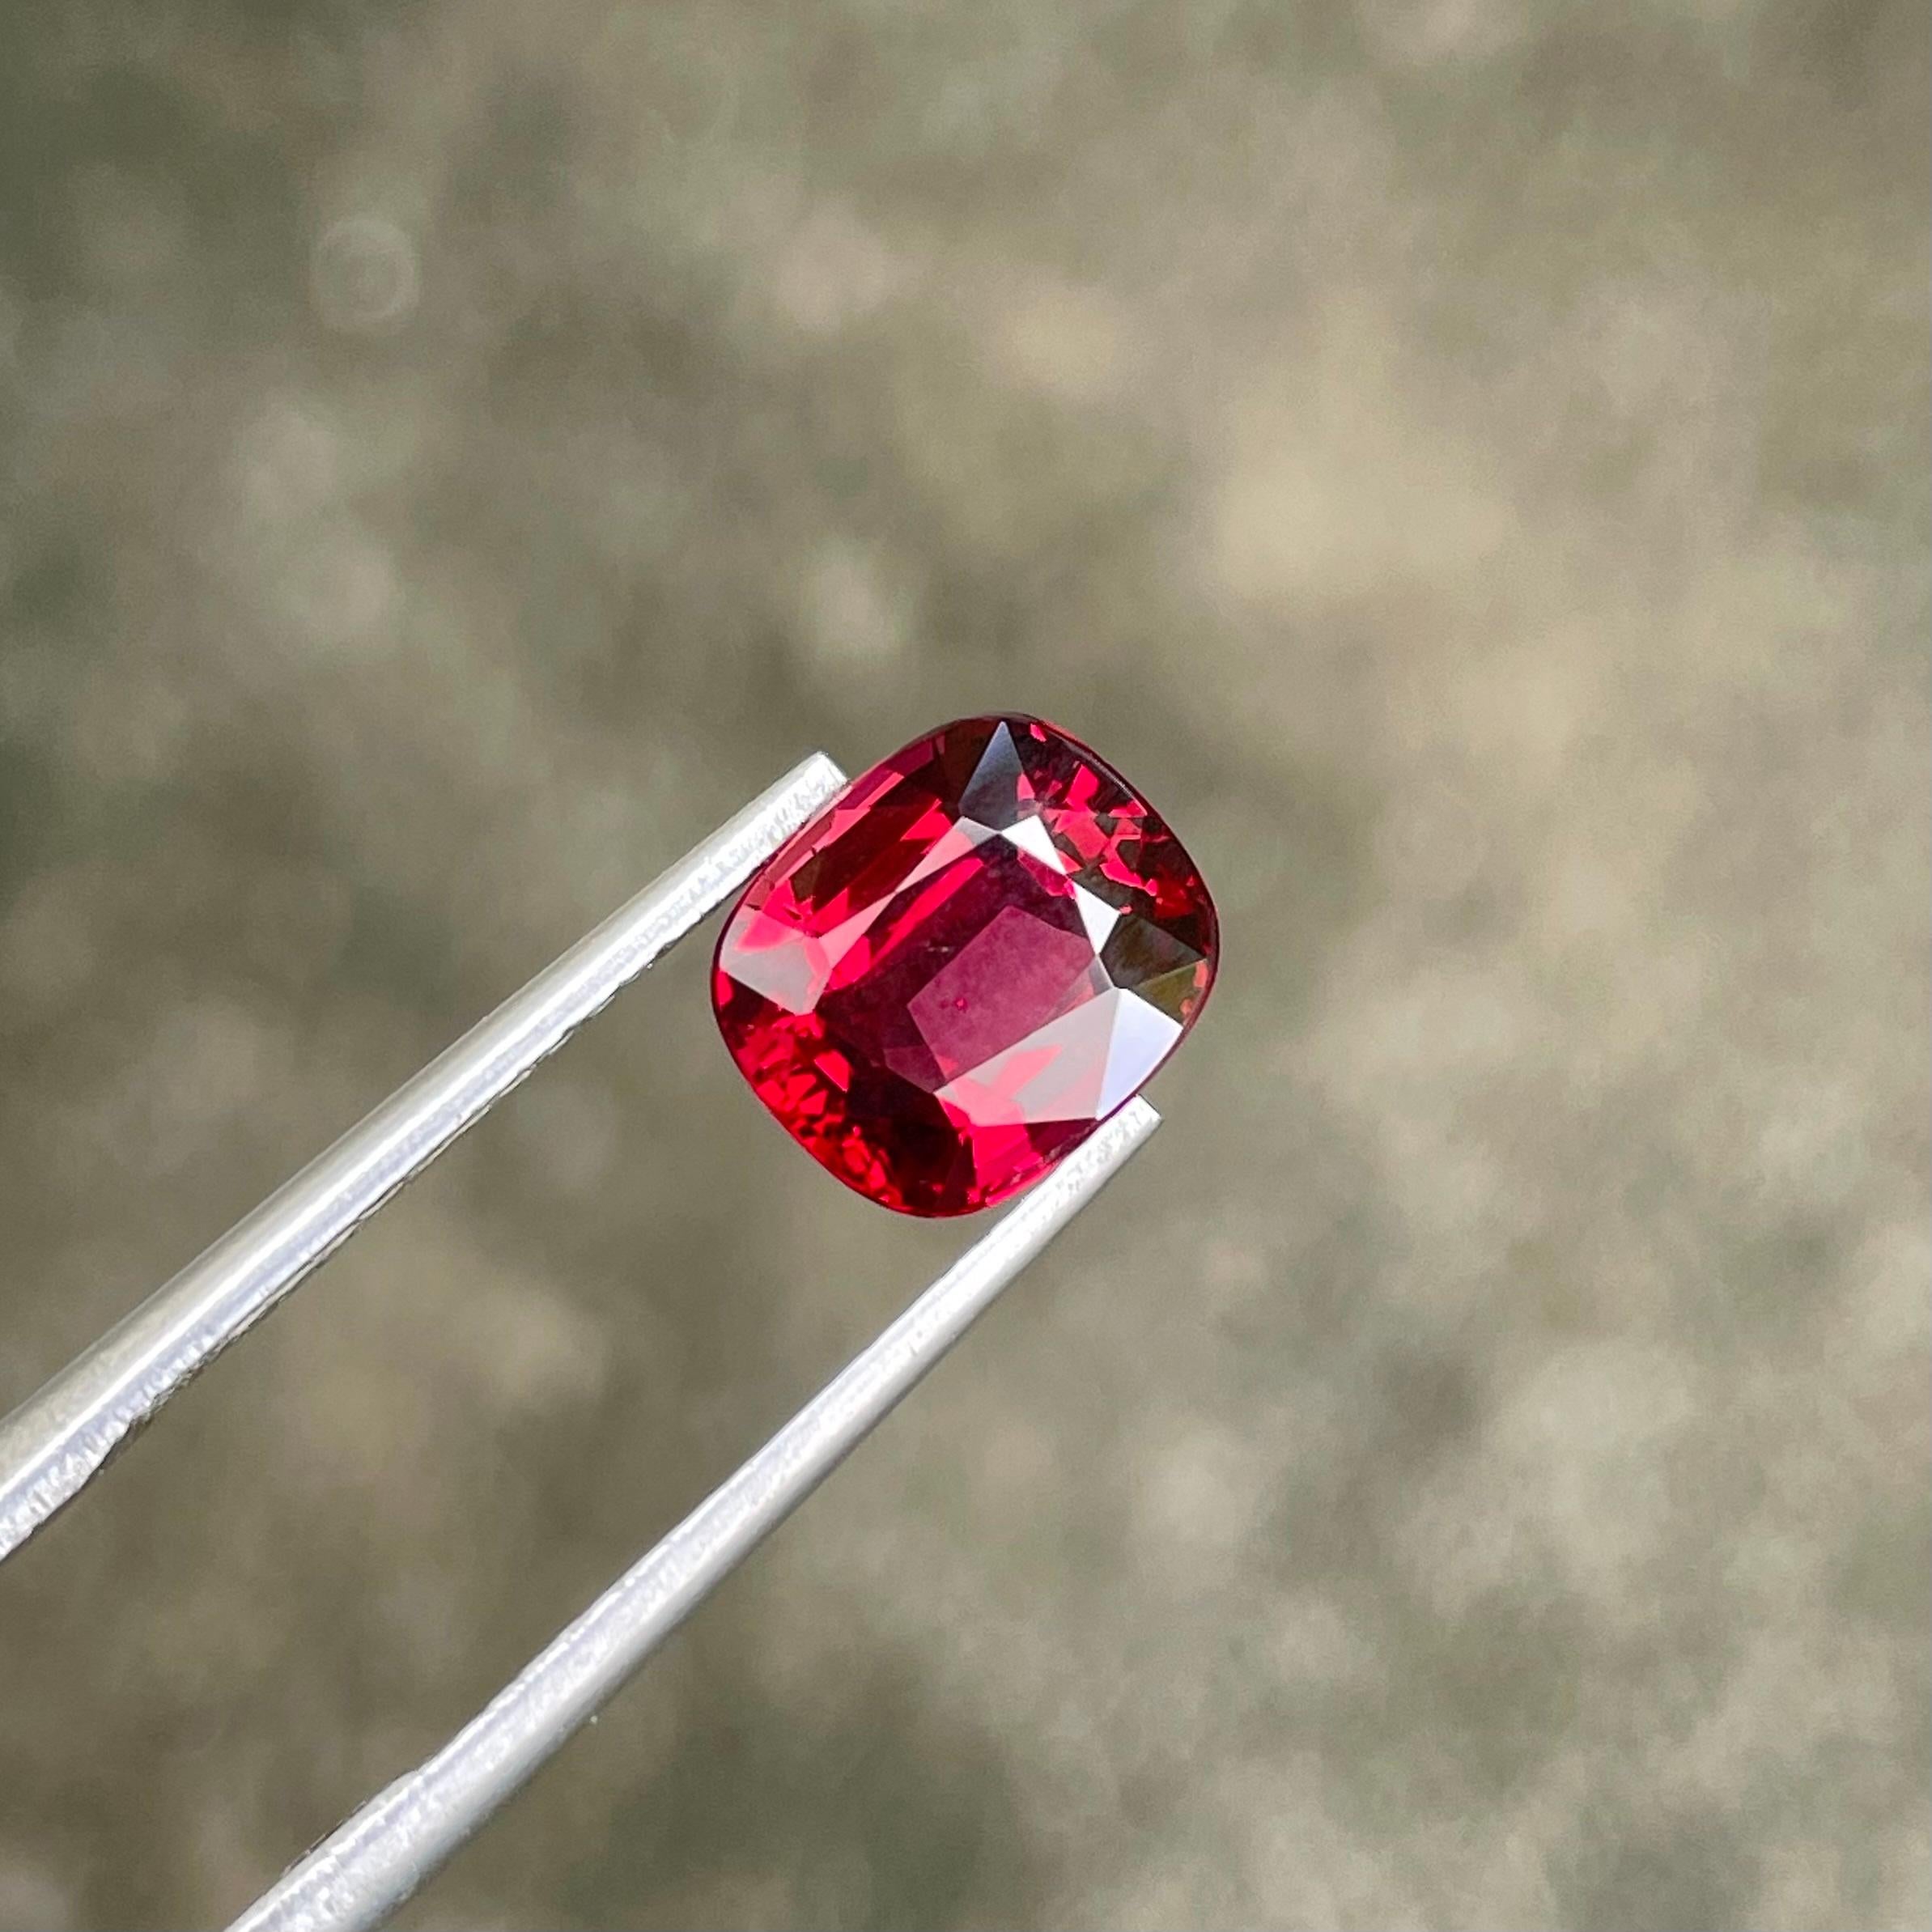 Weight : 2.70 carats 
Dimensions : 8.7x7.6x4.7 mm
Clarity : VVS (Very, Very Slightly Included)
Treatment : None
Origin : Burma
Cut : Cushion
Shape : Step Cushion




Indulge in the timeless allure of the Vivid Red Burmese Loose Spinel, a captivating